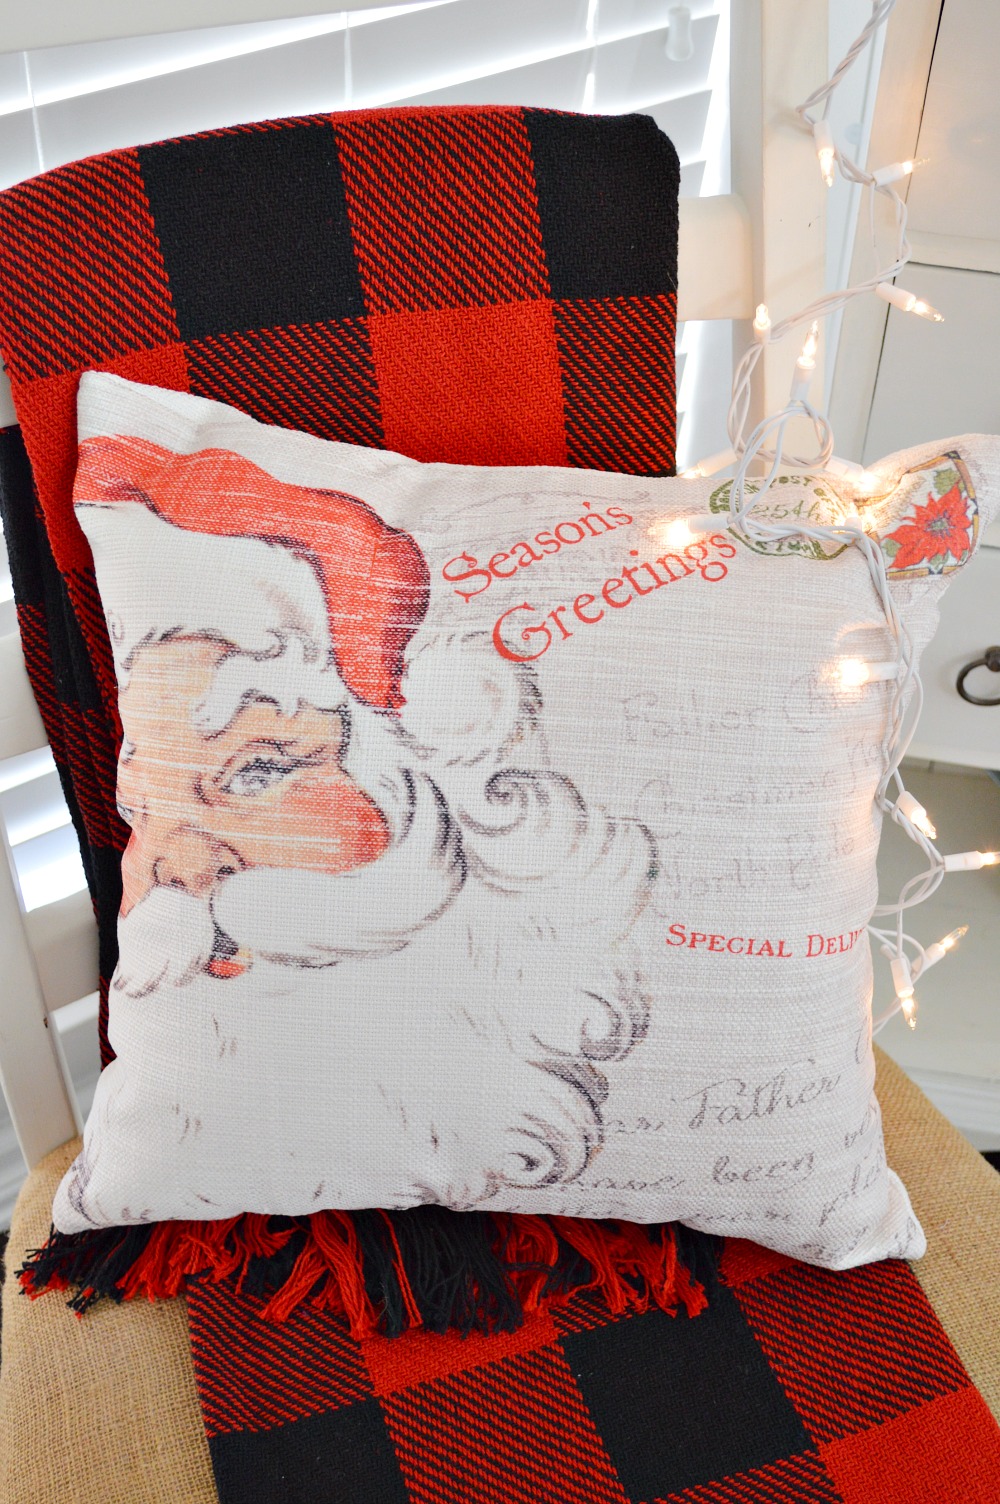 Merry Christmas - Jolly Santa pillow - Vintage holiday decorating, apothecary cabinet. Crock collection, plaid accents. 